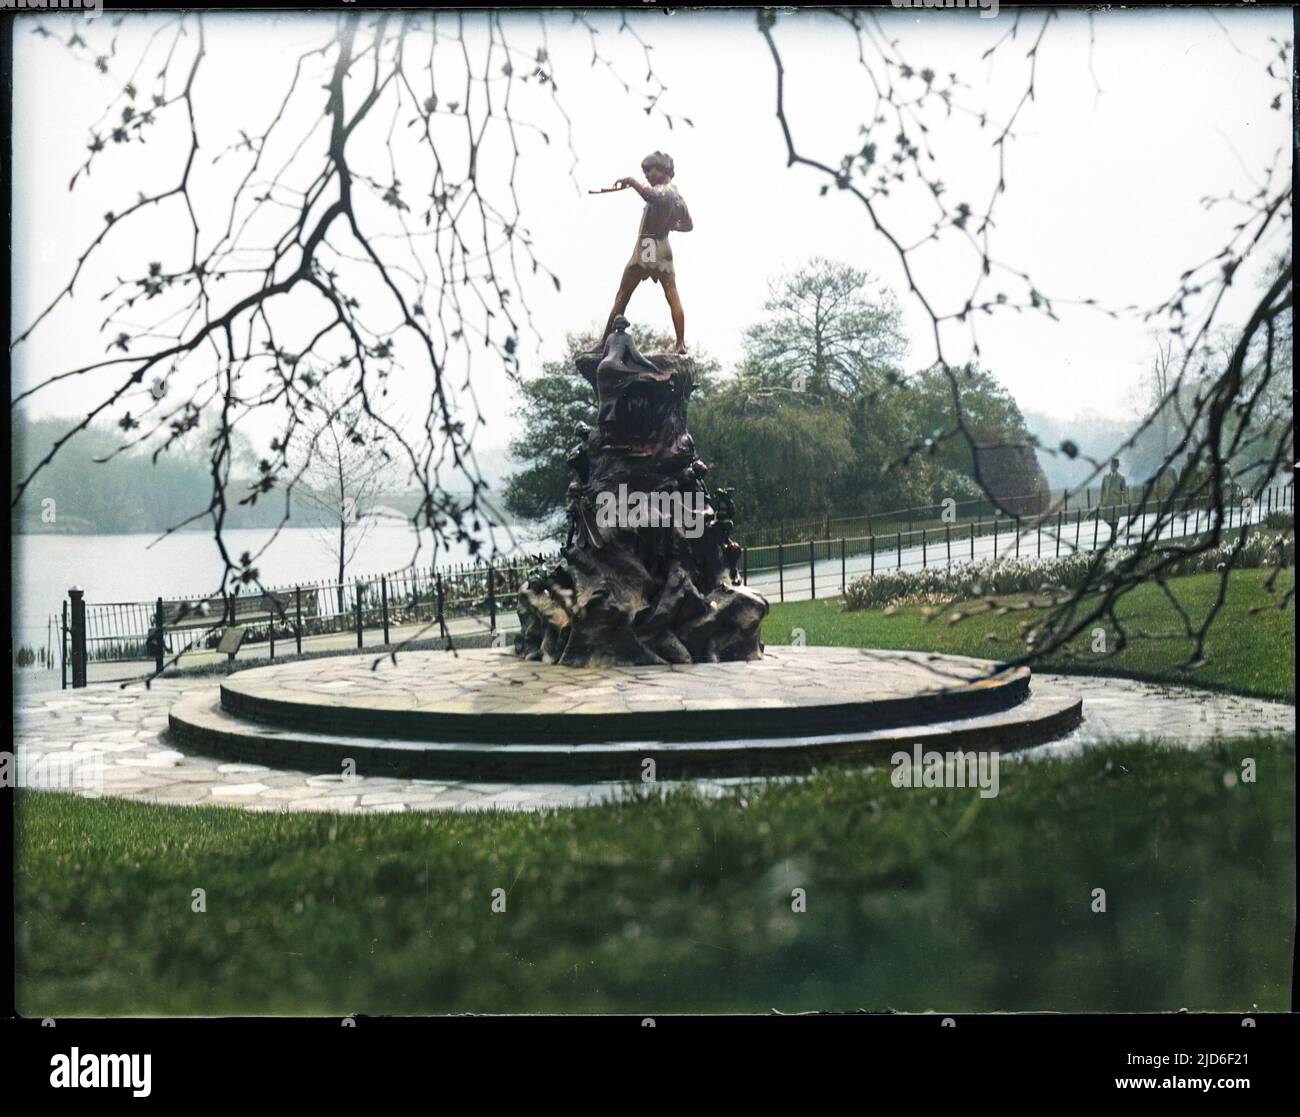 The Peter Pan statue was erected on 1 May 1912 in Kensington Gardens and sculpted by George Frampton. Peter Pan entered London along the Serpentine in the story. Colourised version of : 10162208       Date: 1930s Stock Photo